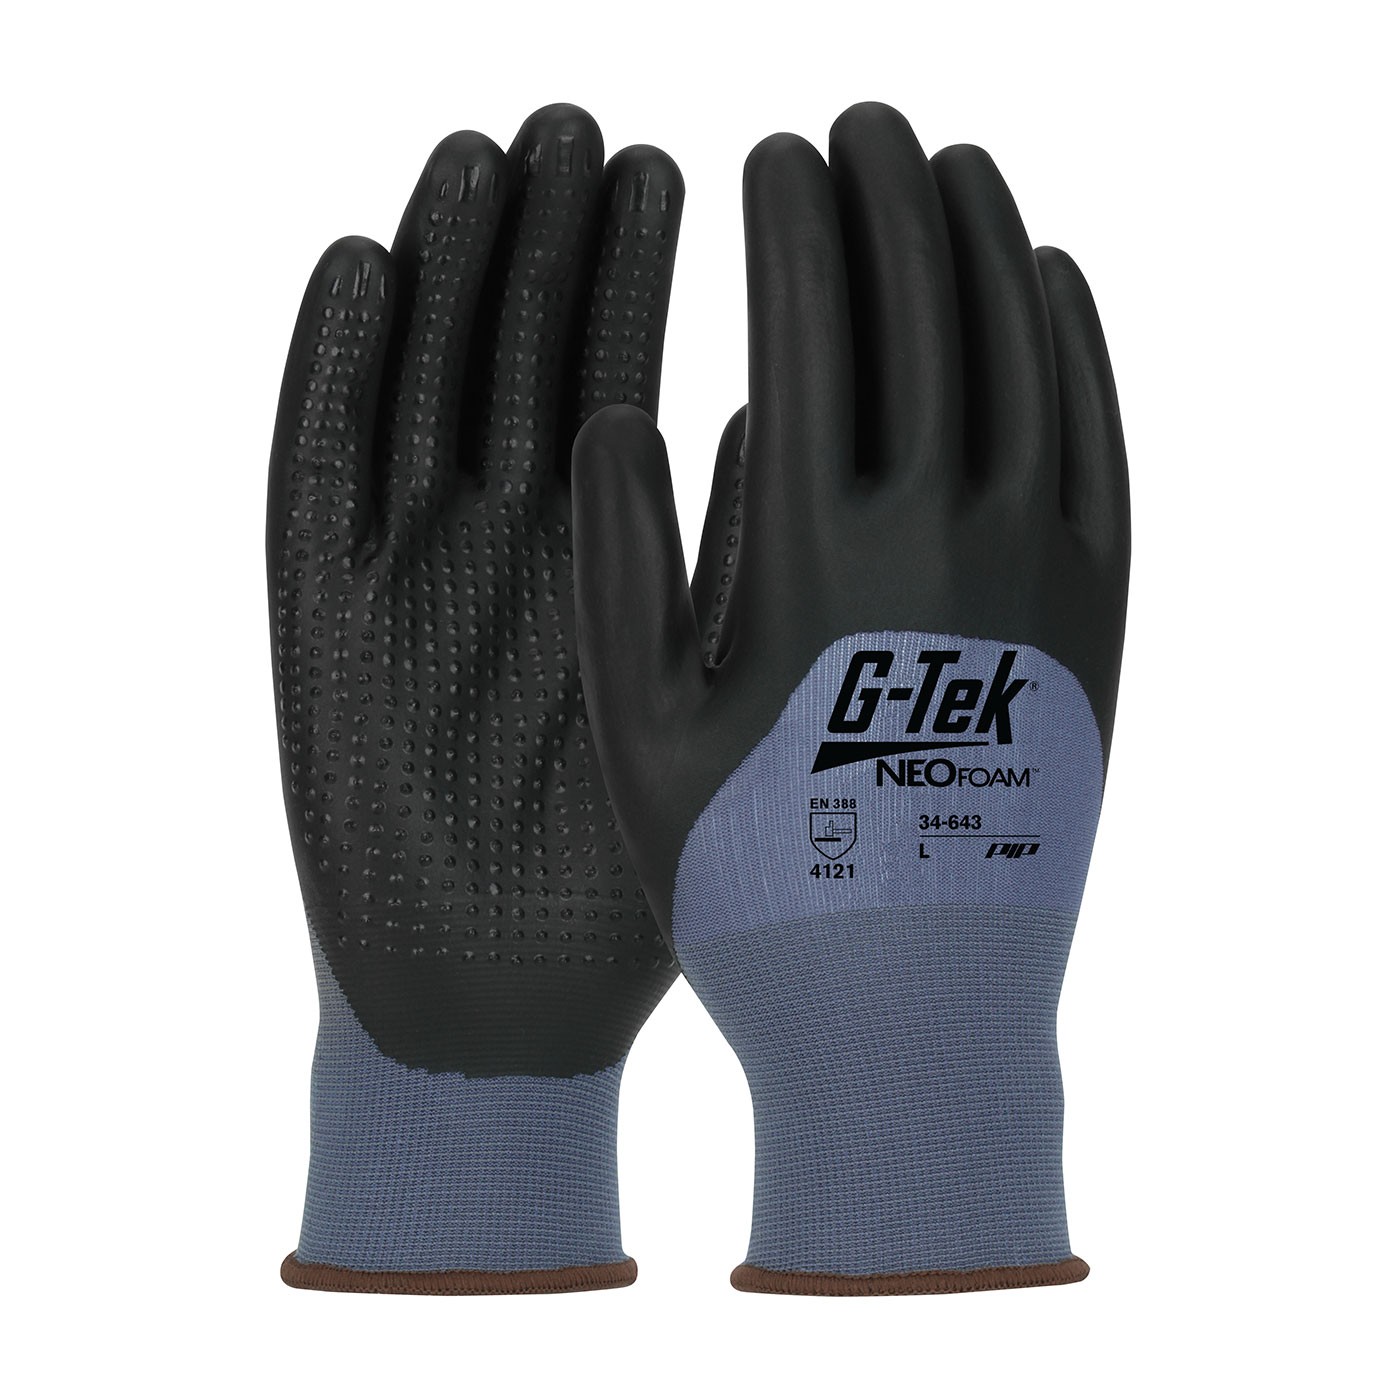 G-Tek® NeoFoam® Seamless Nylon Glove with NeoFoam® Coated Palm, Fingers & Knuckles and Micro Dot Palm - Touchscreen Compatible (#34-643)